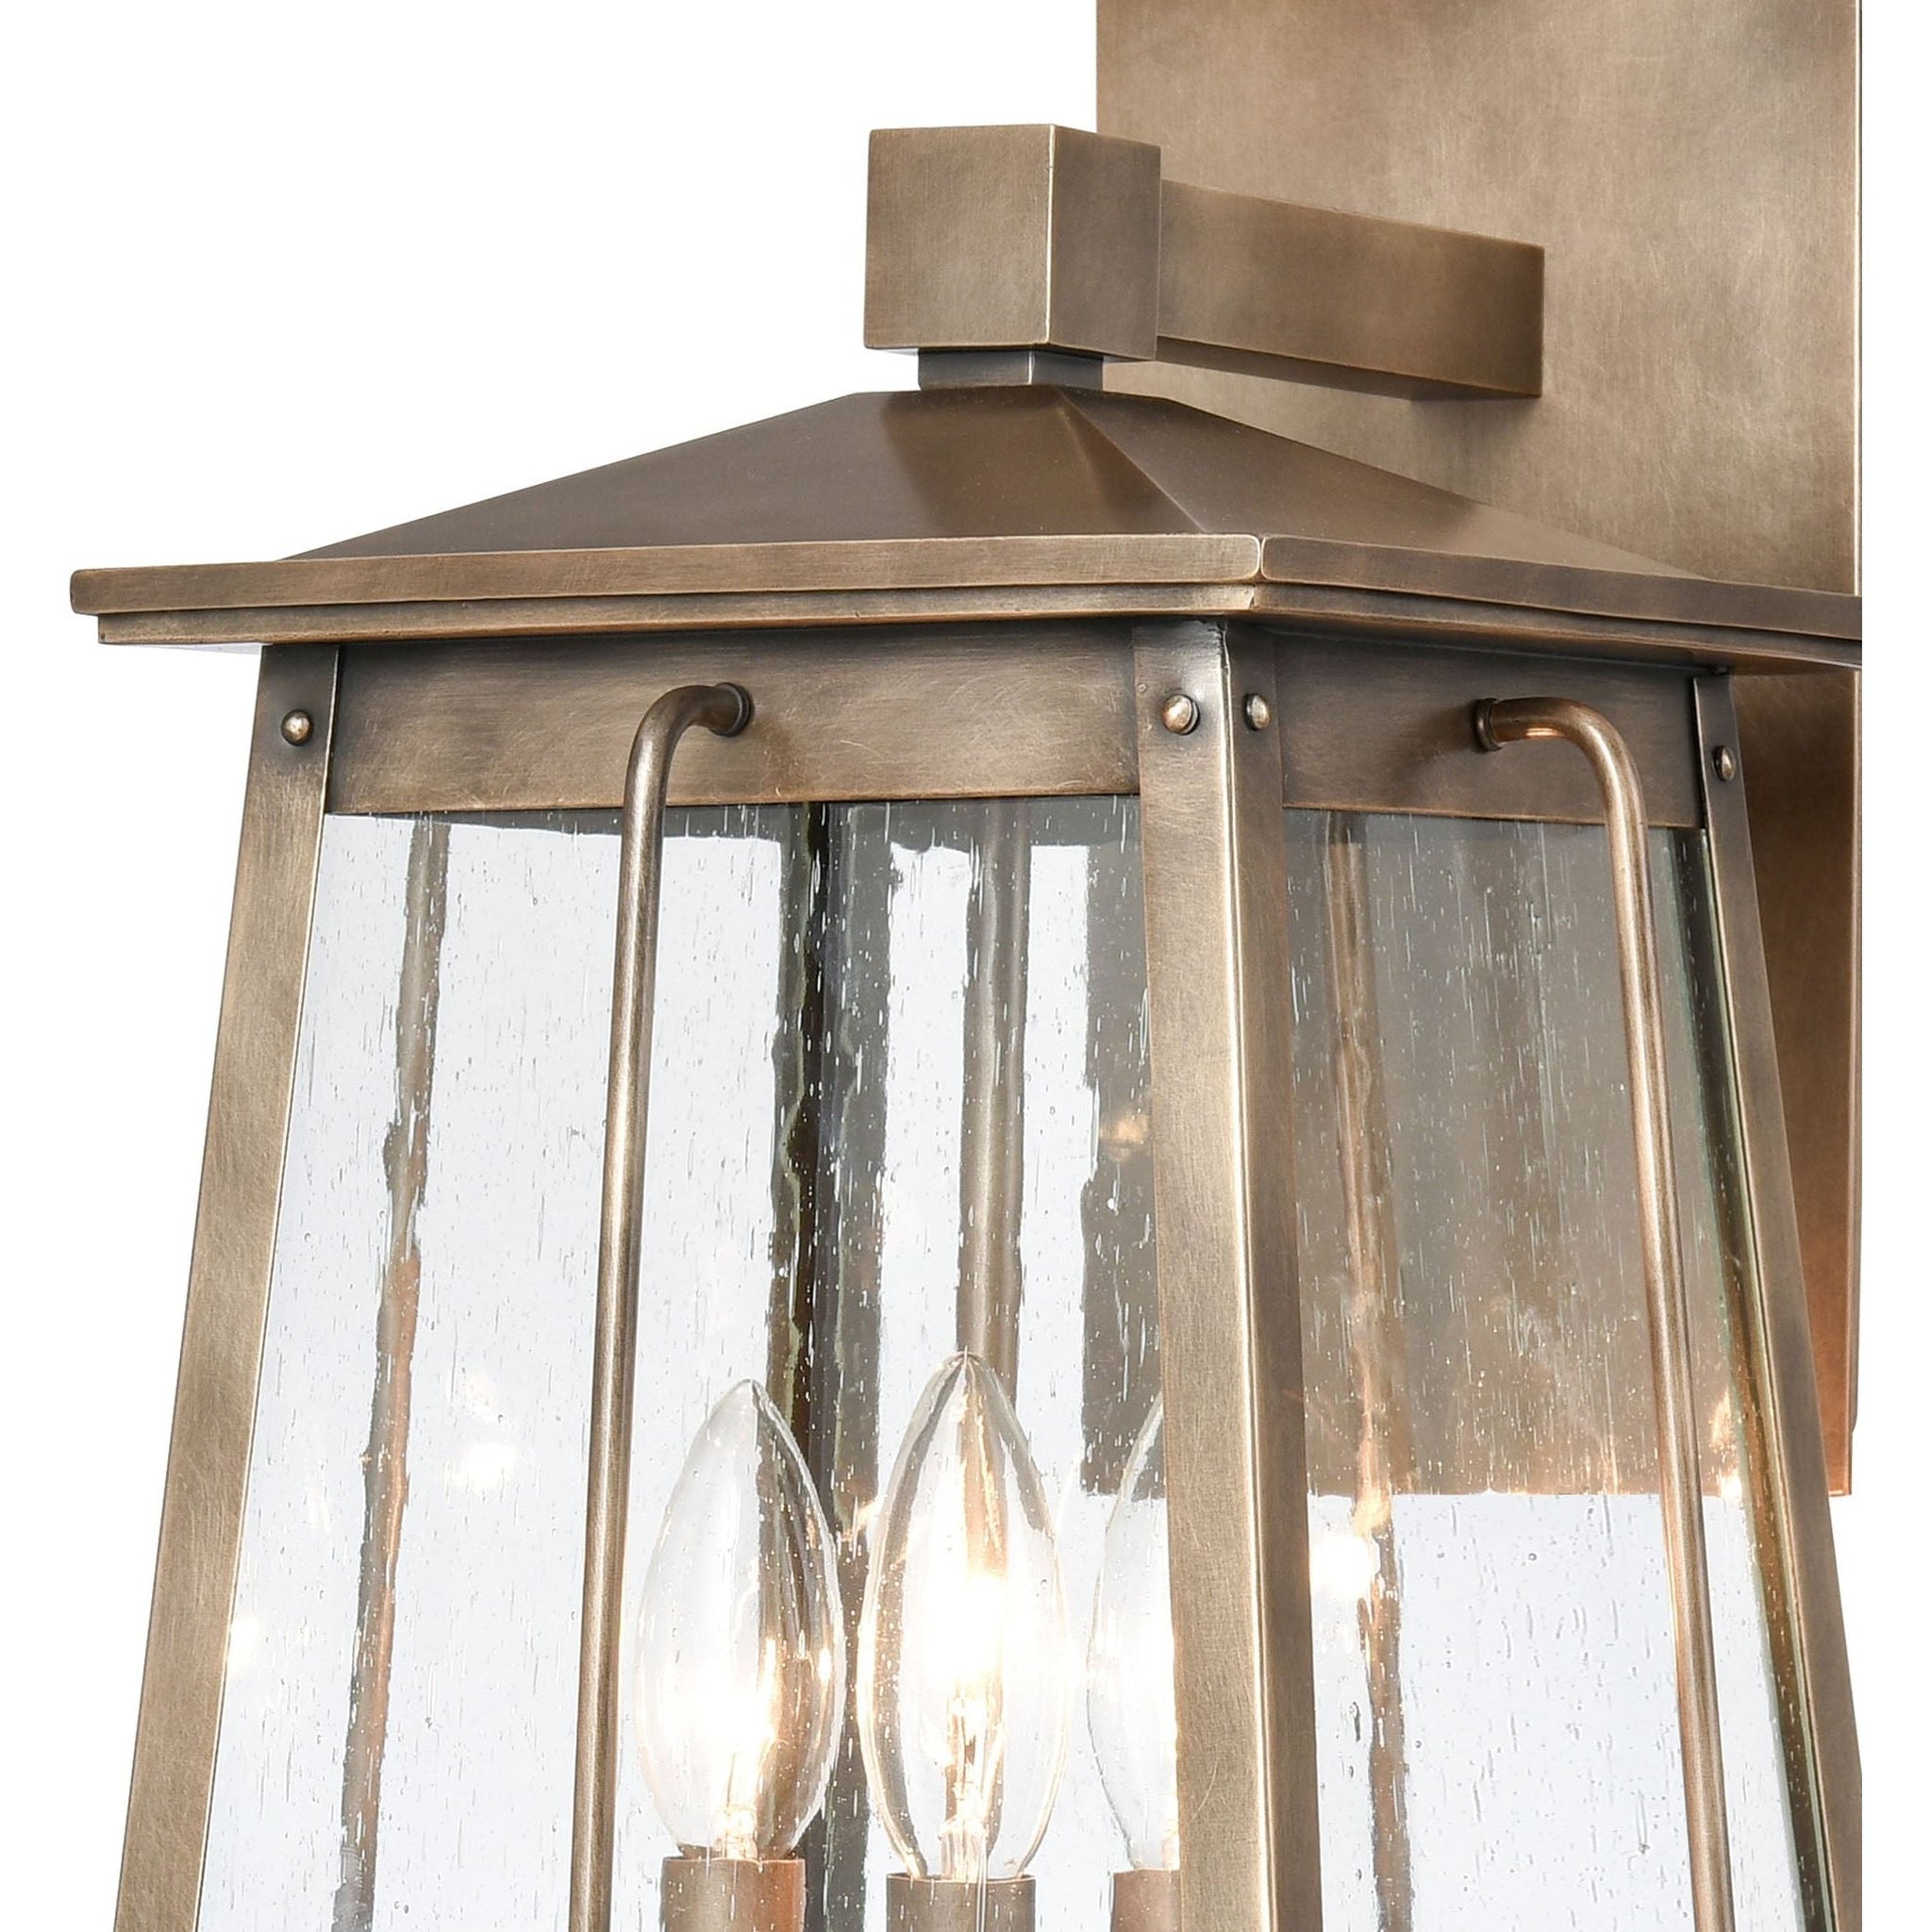 Kirkdale 19" High 3-Light Outdoor Sconce